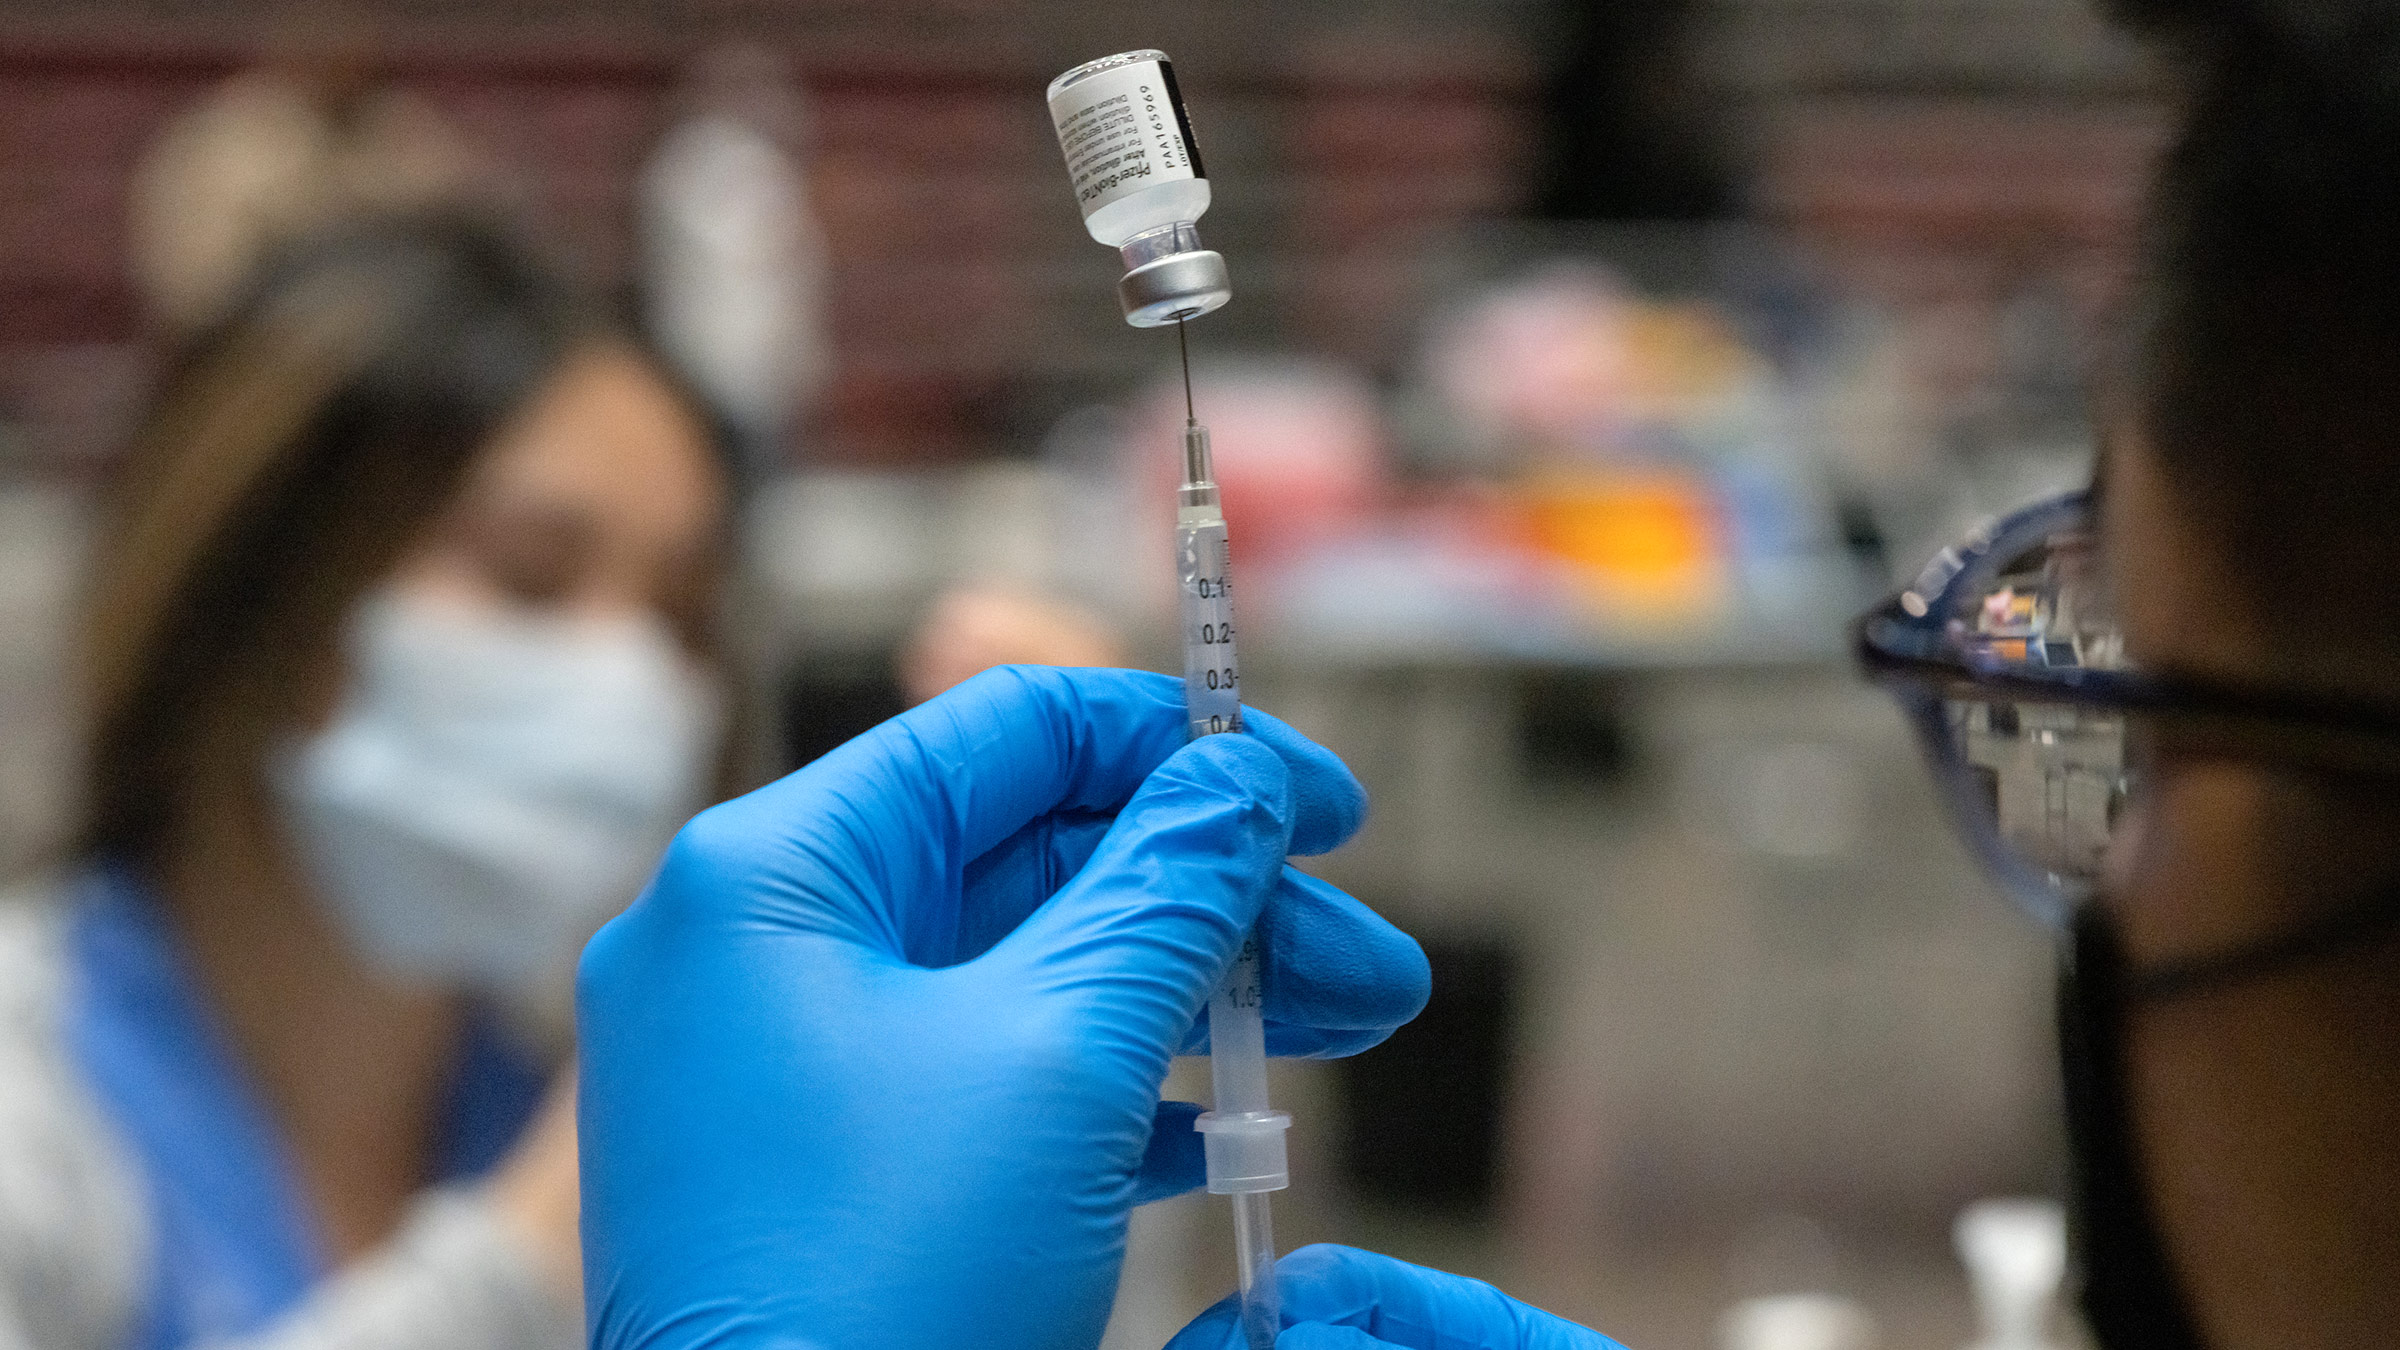 A health care worker prepares a dose of the Pfizer-BioNTech Covid-19 vaccine inside the Viejas Arena in San Diego, California, on Thursday, April 1. 